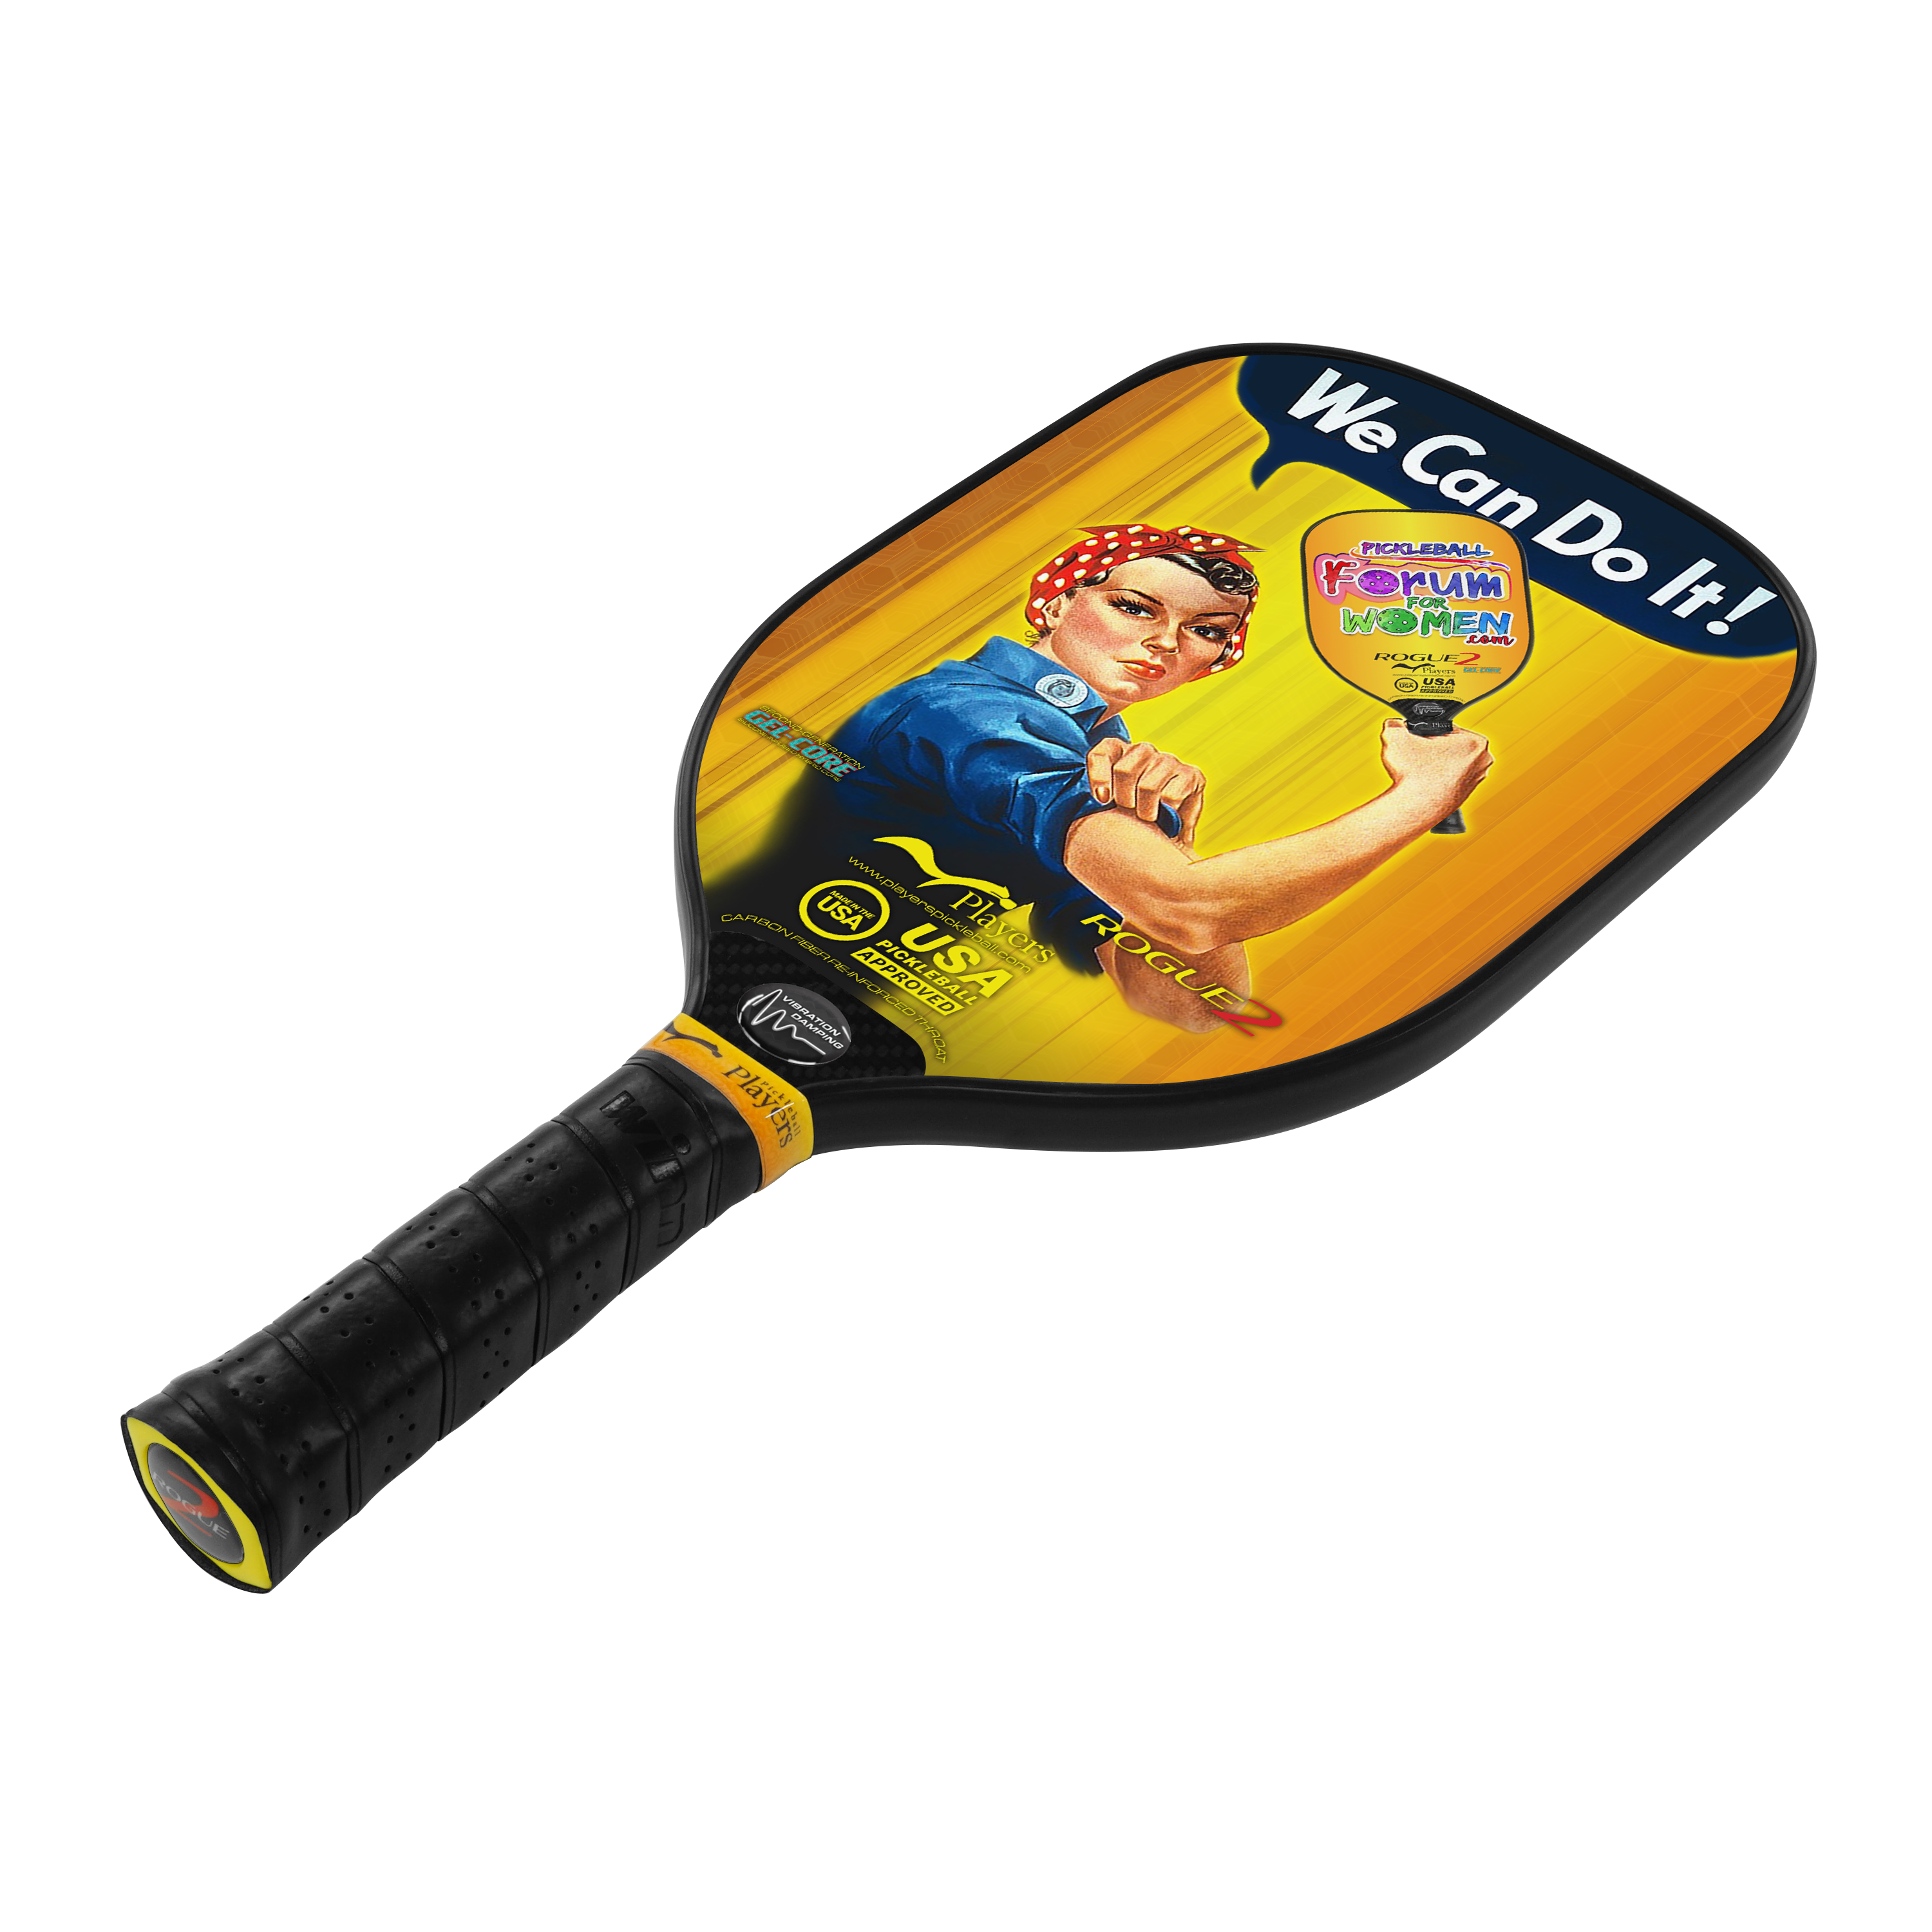 Rogue2  (Hybrid Shape)Gel-Core "Pickleball Forum for Women" Special Edition